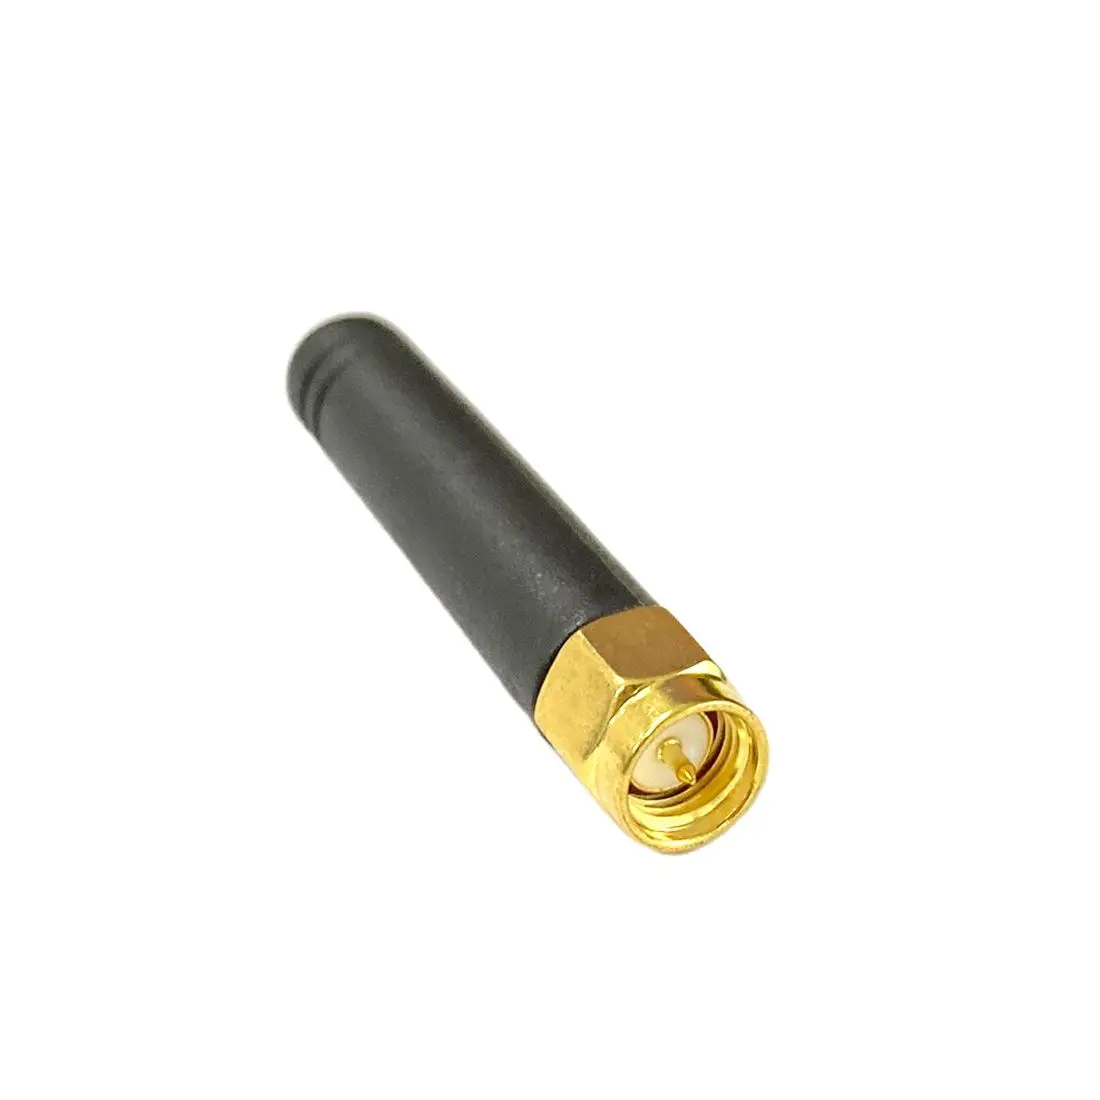 

2pcs GSM 868Mhz/900Mhz/915MHz Antenna 2dbi SMA Male Connector 5cm Long RC Receive Transmit Aerial Free Shipping